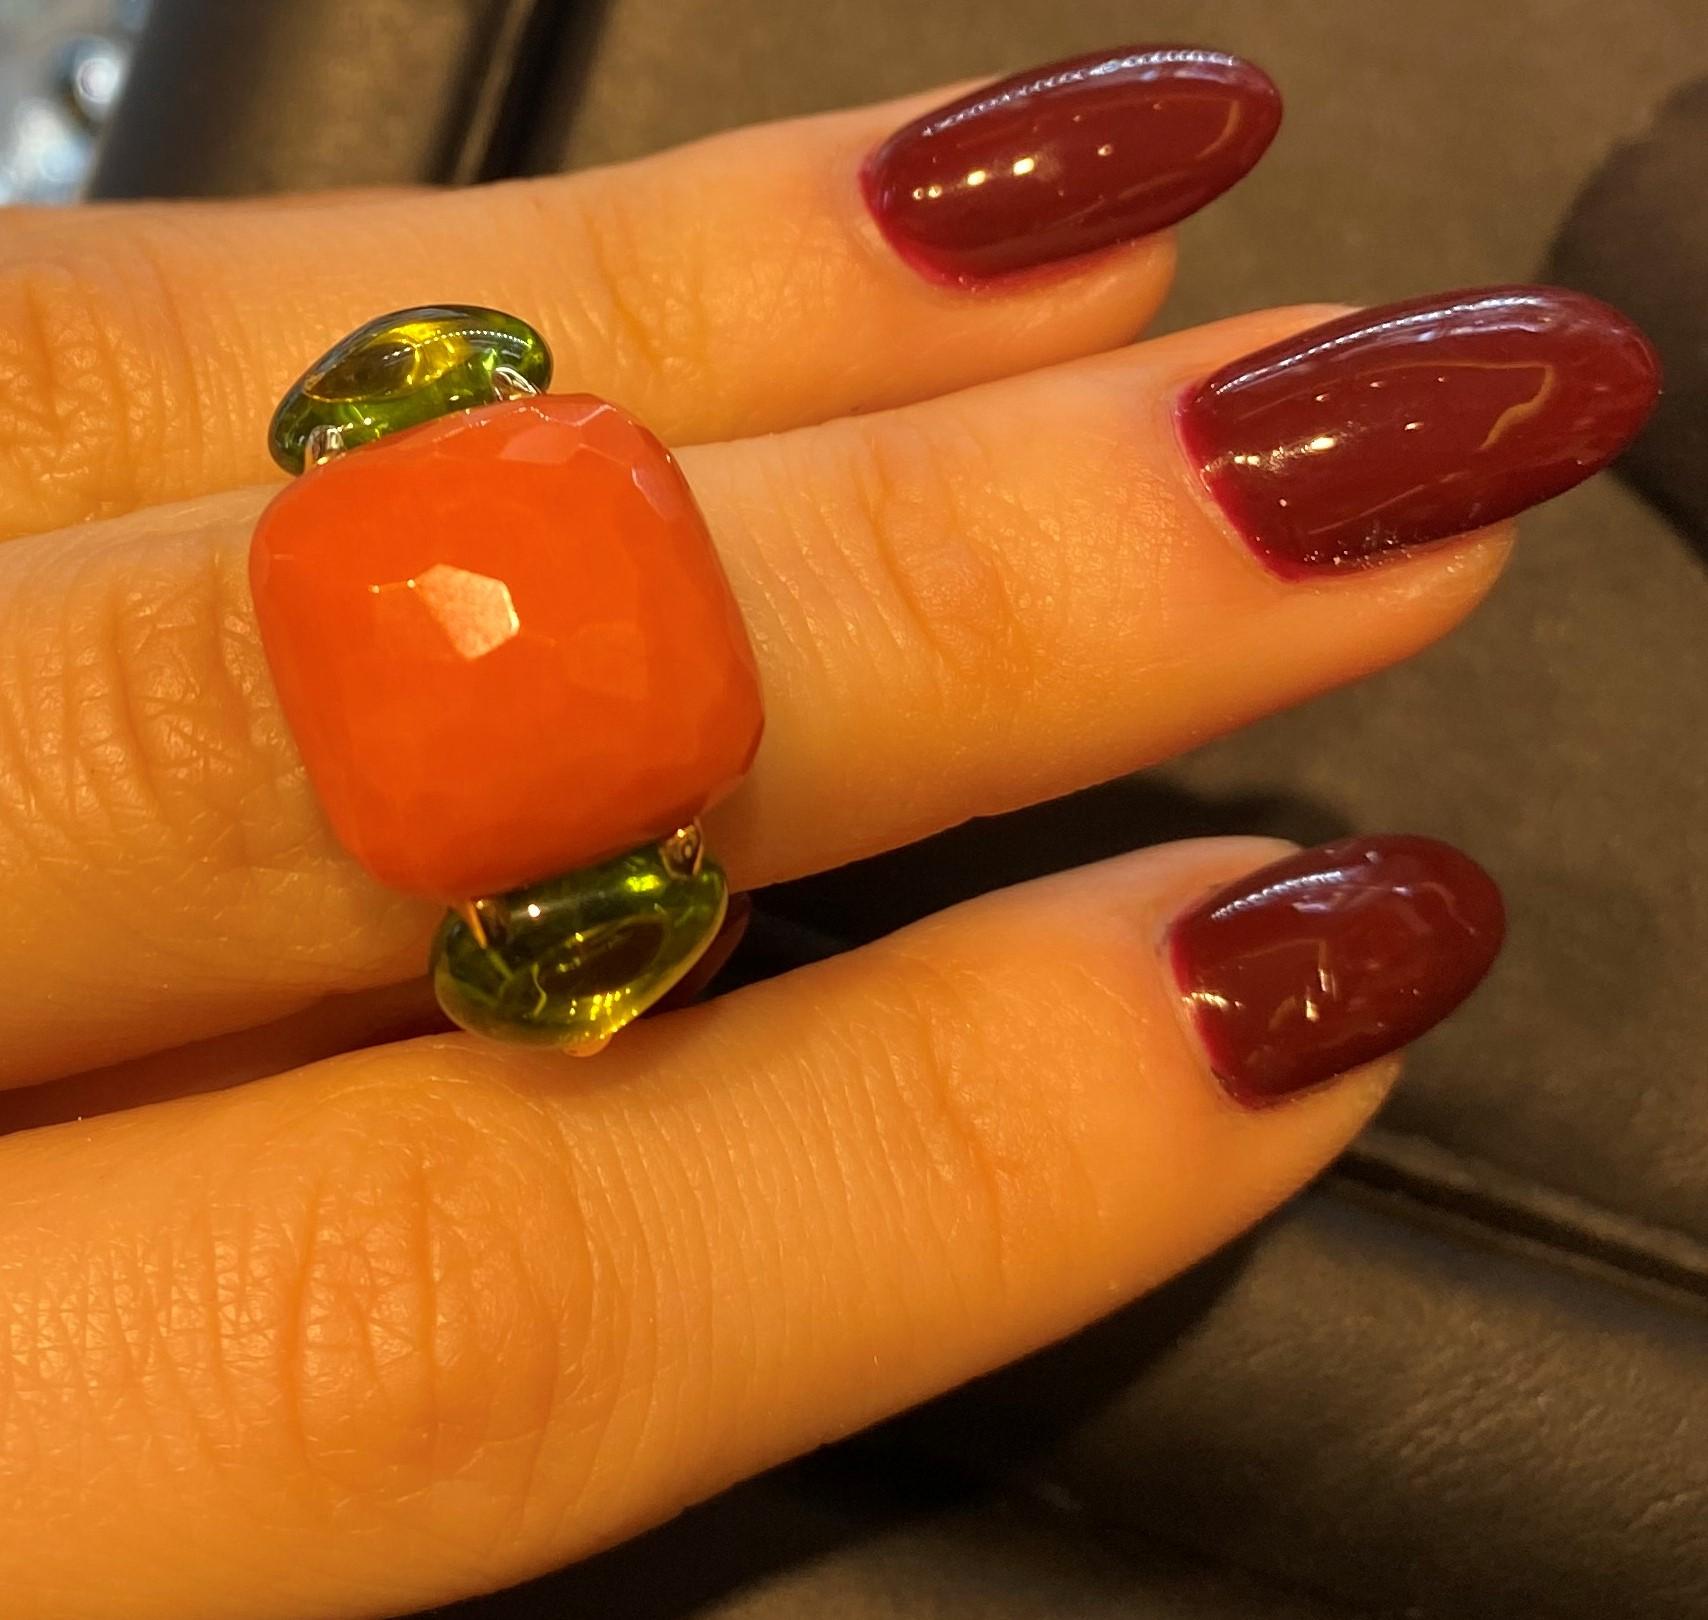 Pomellato Capri Collection Ring in 18 Karat Rose Gold with a central faceted Coral stone sided by two cabochon Peridots 
Size Europe 57
Can be resized 
Comes with Box and Papers 
Original Price: €11,500

READY TO SHIP
*Shipment of this piece is not